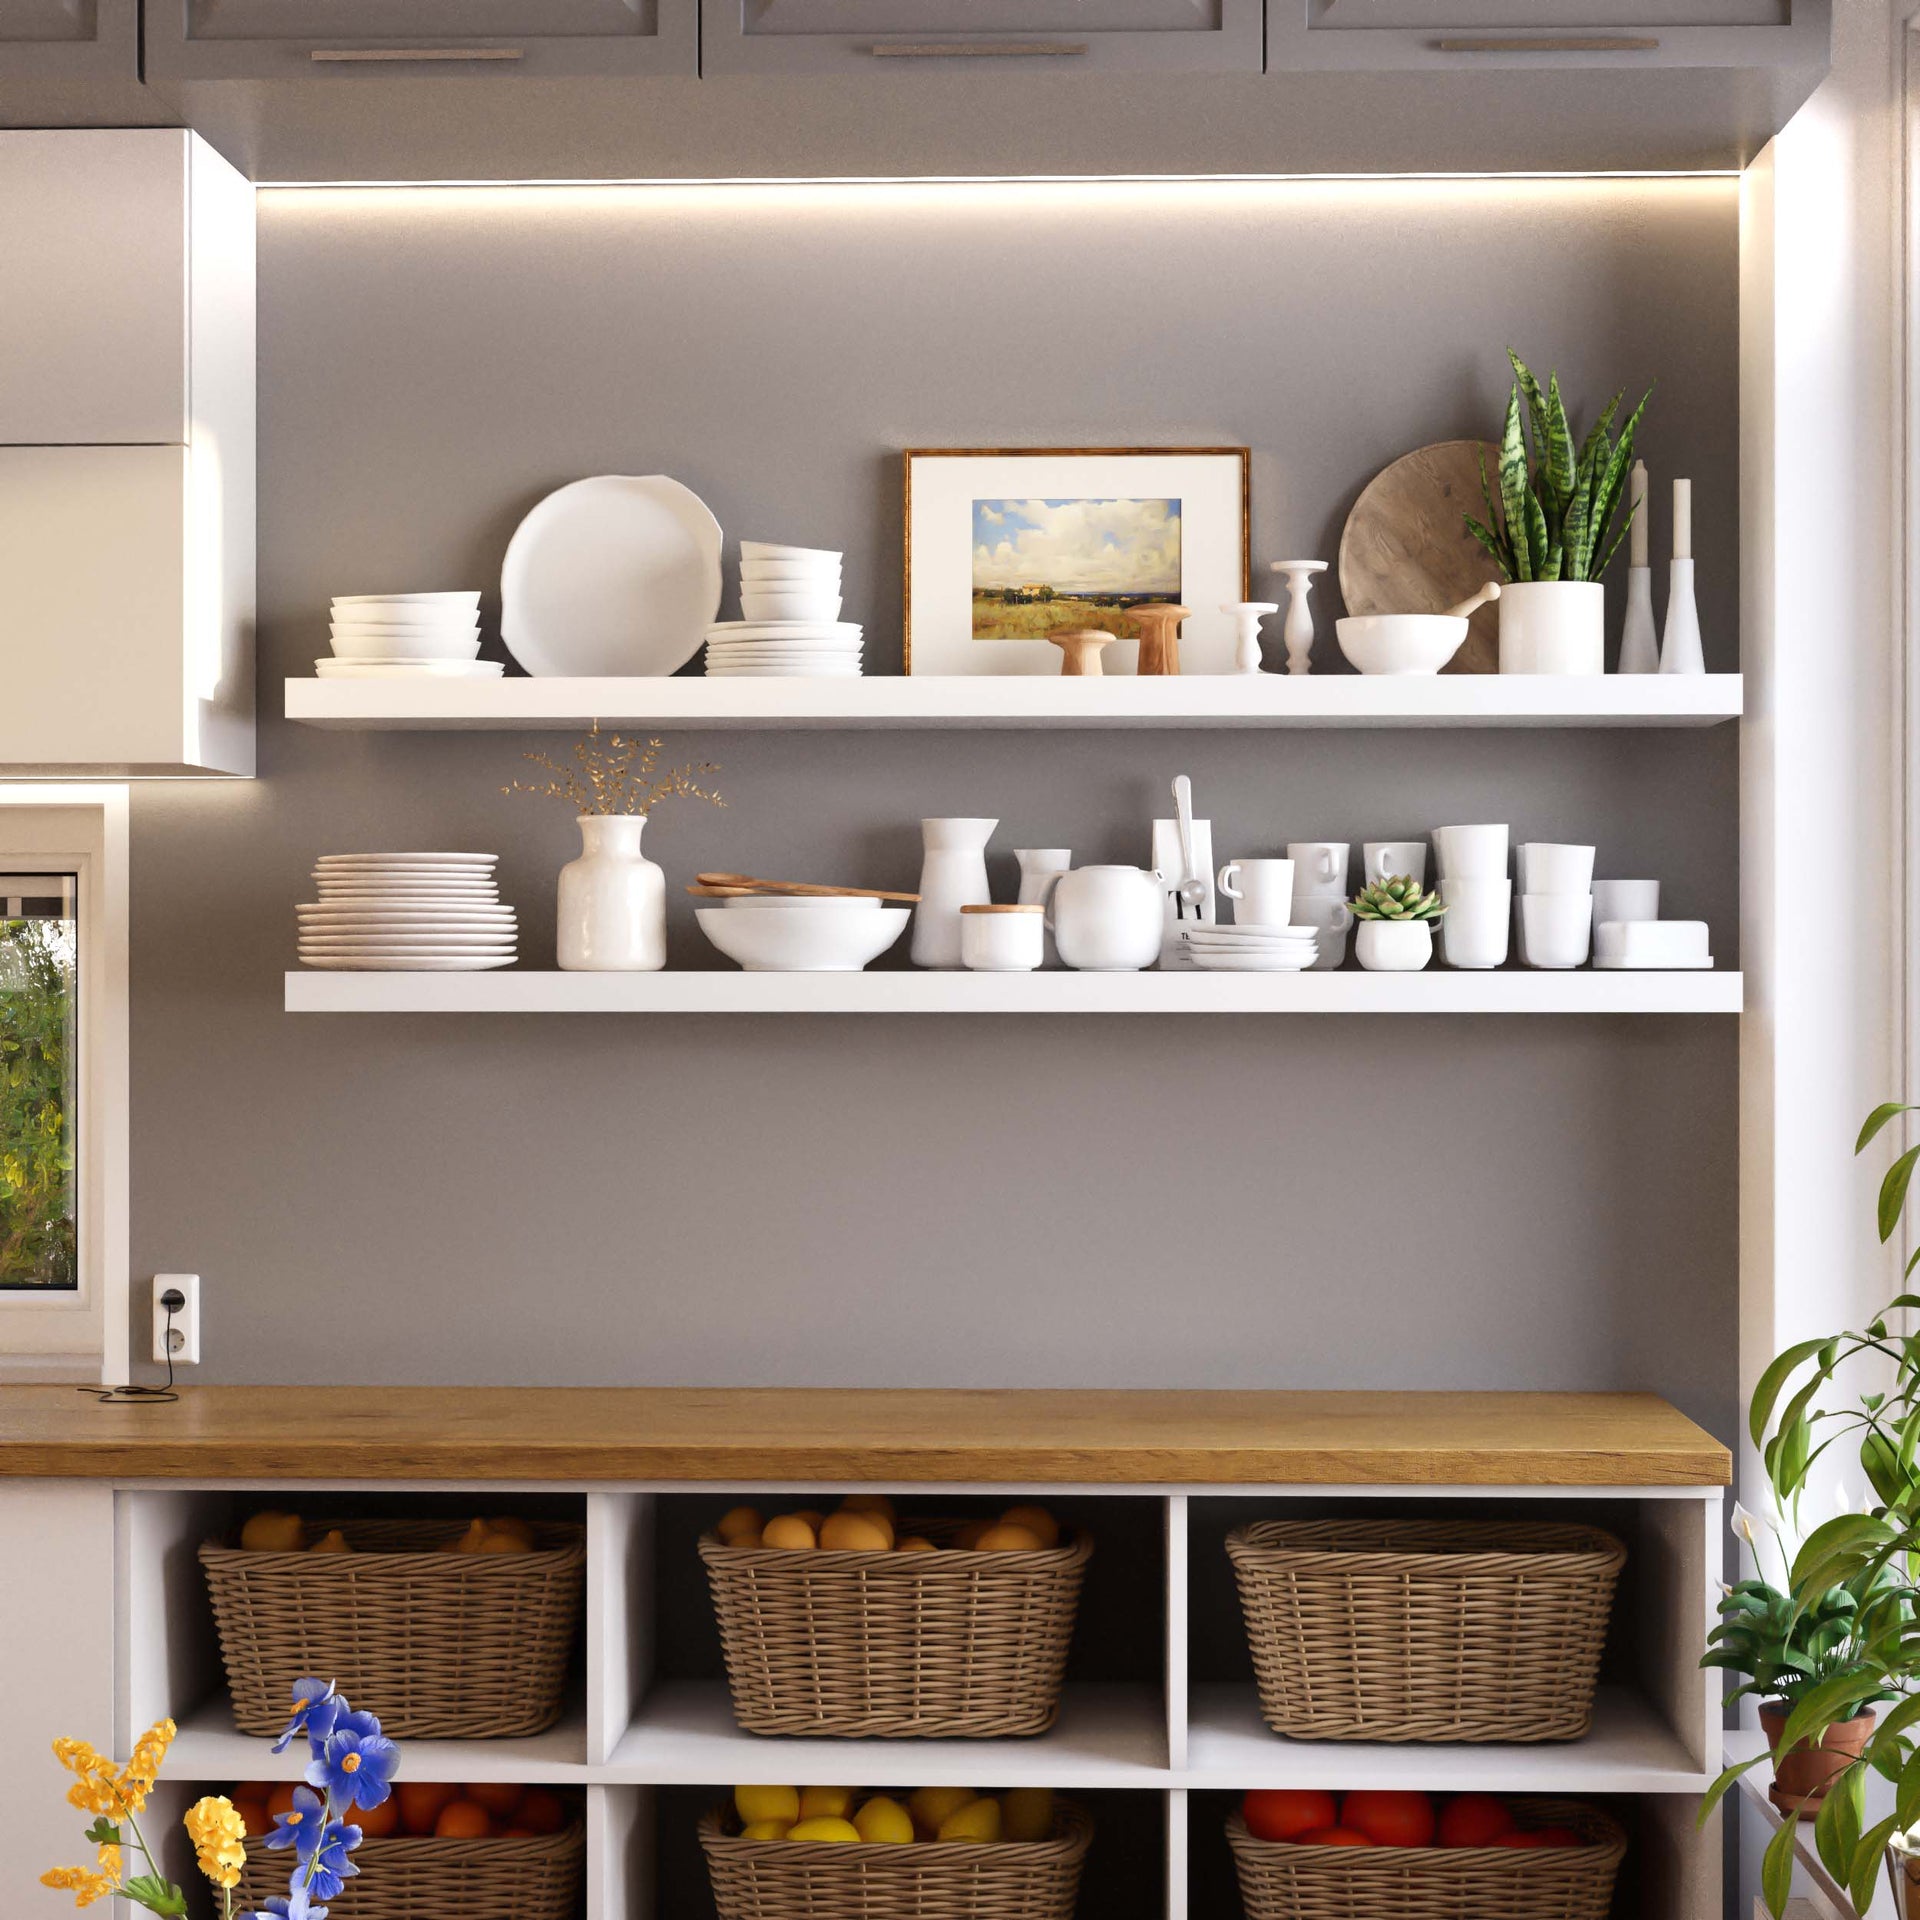 Three scenes with stylish rustic floating shelves, each adorned with items like books, plates, vases, and decorative accessories in a well-lit, cozy setting.